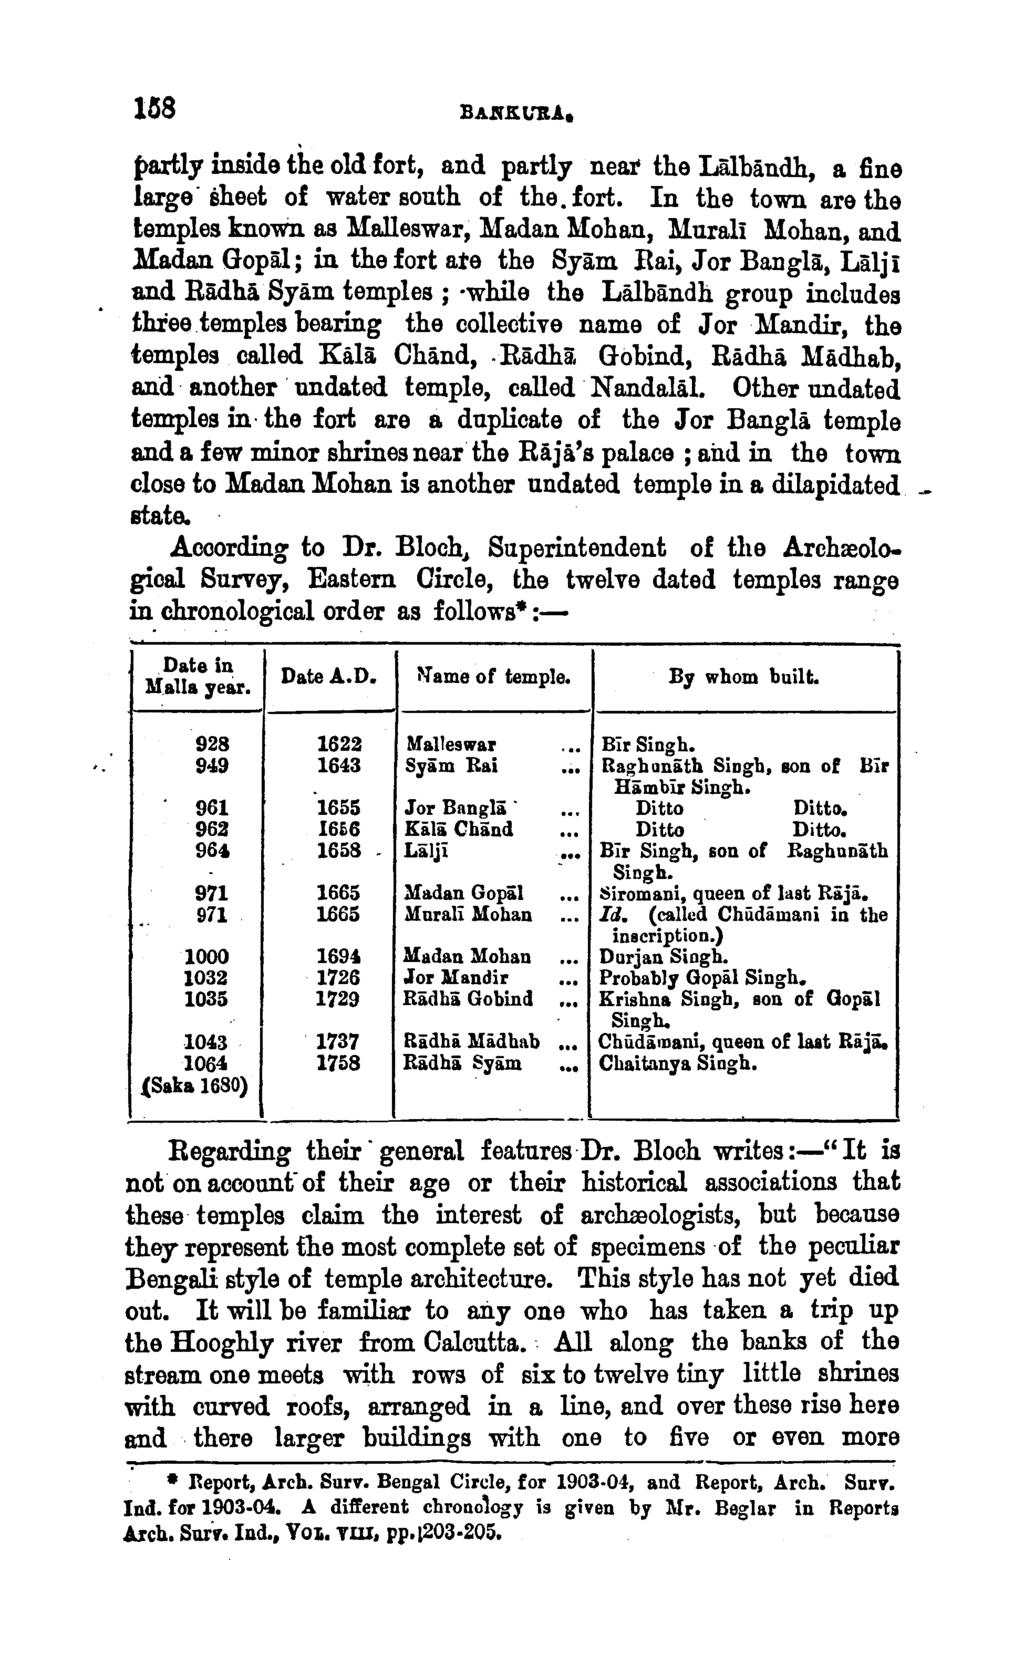 uss BA.NKt..'lt.! 1. partly inside the old fort, and partly near the Lalbandh, a fine large sheet of water south of the. fort. In the town are the temples known. as Yalleswar, Madan Mohan, M.